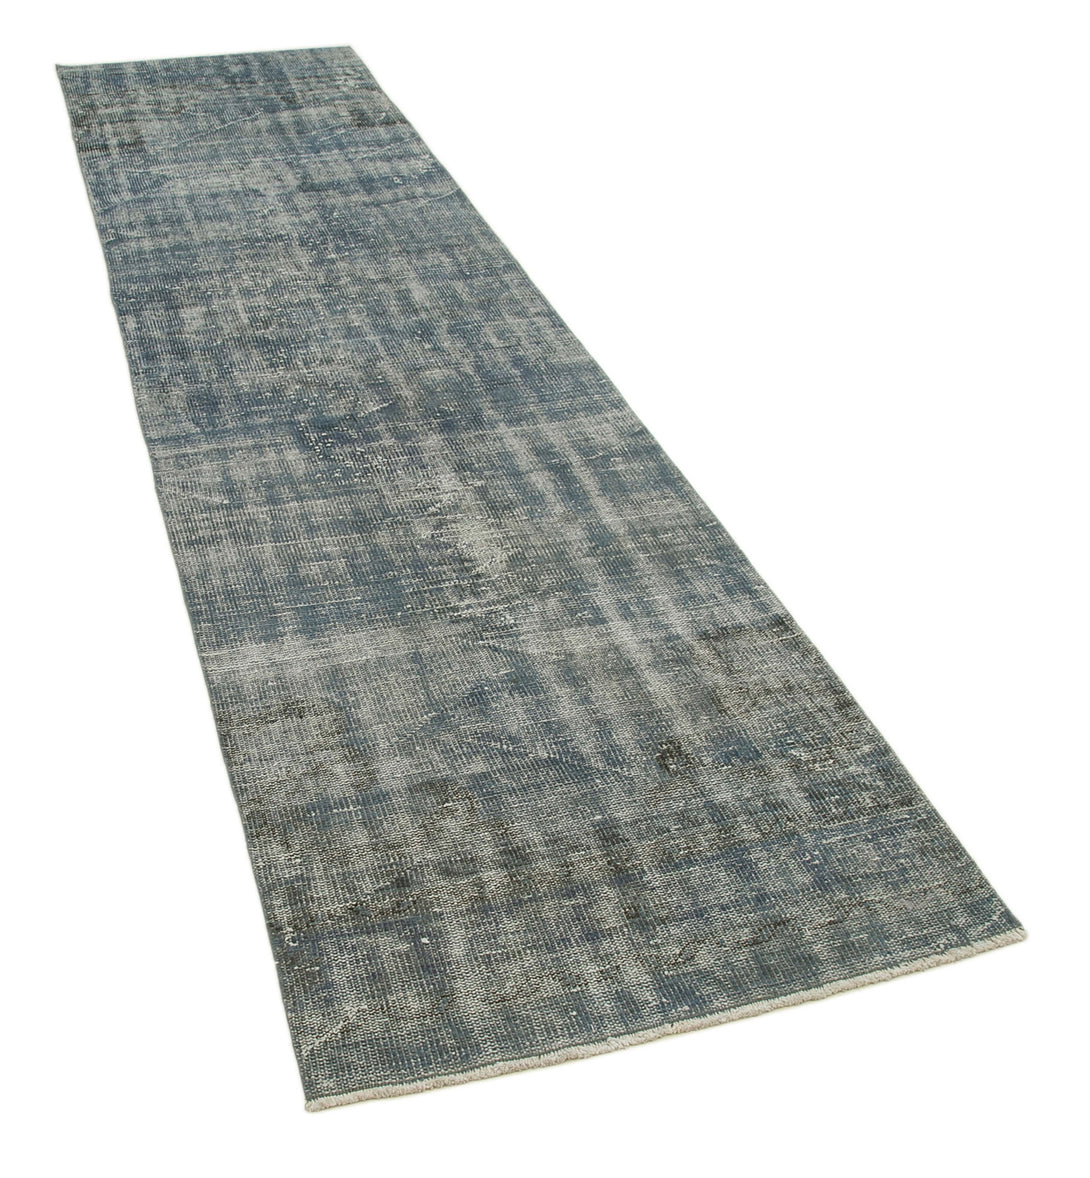 Handmade Overdyed Runner > Design# OL-AC-28624 > Size: 2'-9" x 10'-8", Carpet Culture Rugs, Handmade Rugs, NYC Rugs, New Rugs, Shop Rugs, Rug Store, Outlet Rugs, SoHo Rugs, Rugs in USA